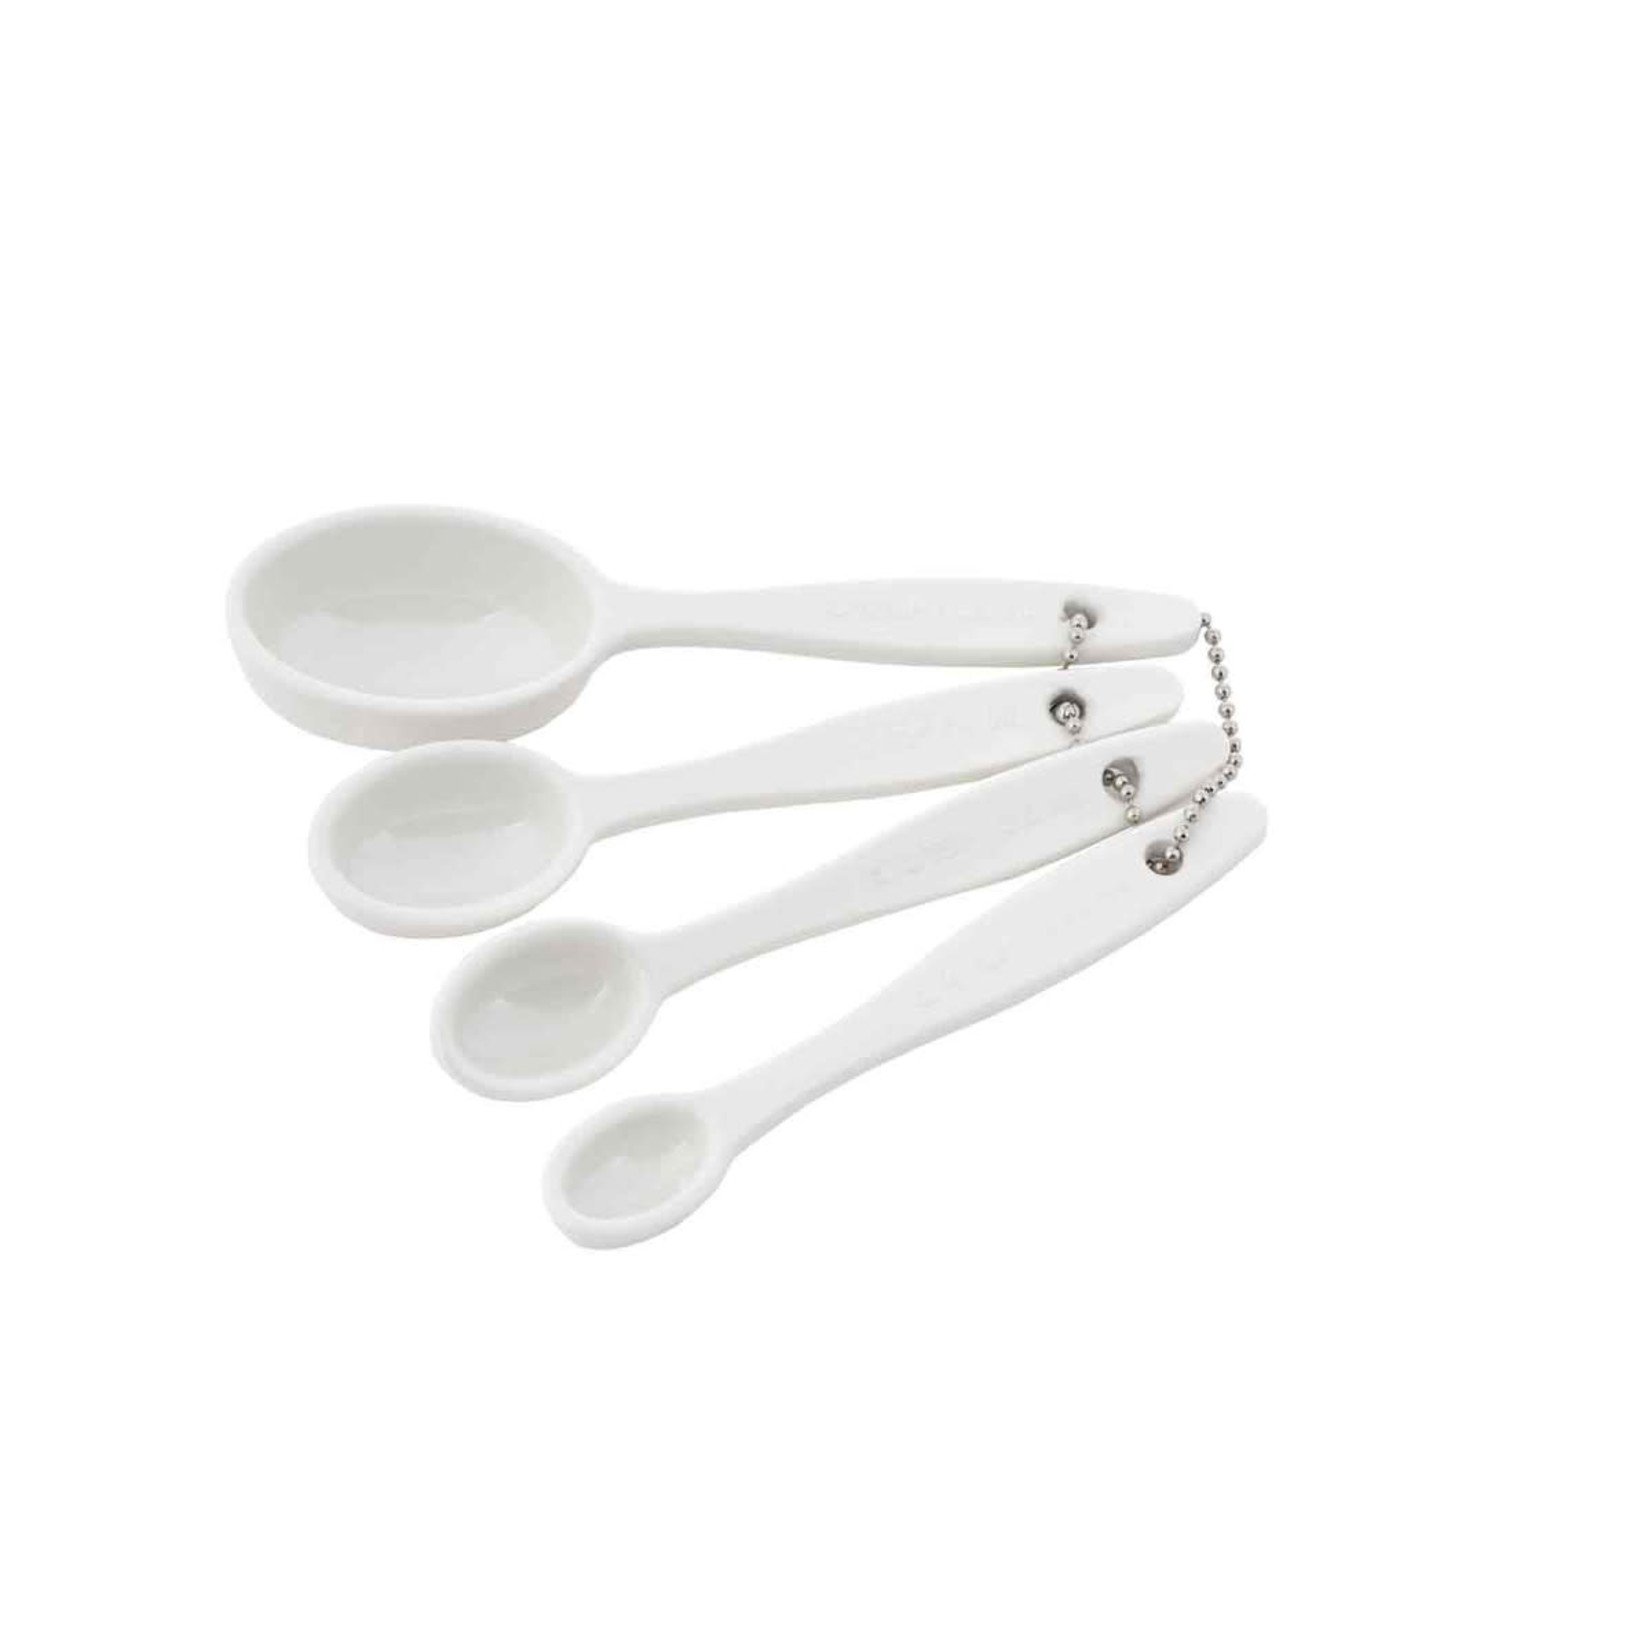 Crofthouse Collection(TM) Measuring Spoons, Set of 4, Includes: 1/4 tsp,  1/2 tsp, 1 tsp, 1 tbsp, Melamine - The Fancy Frog Boutique